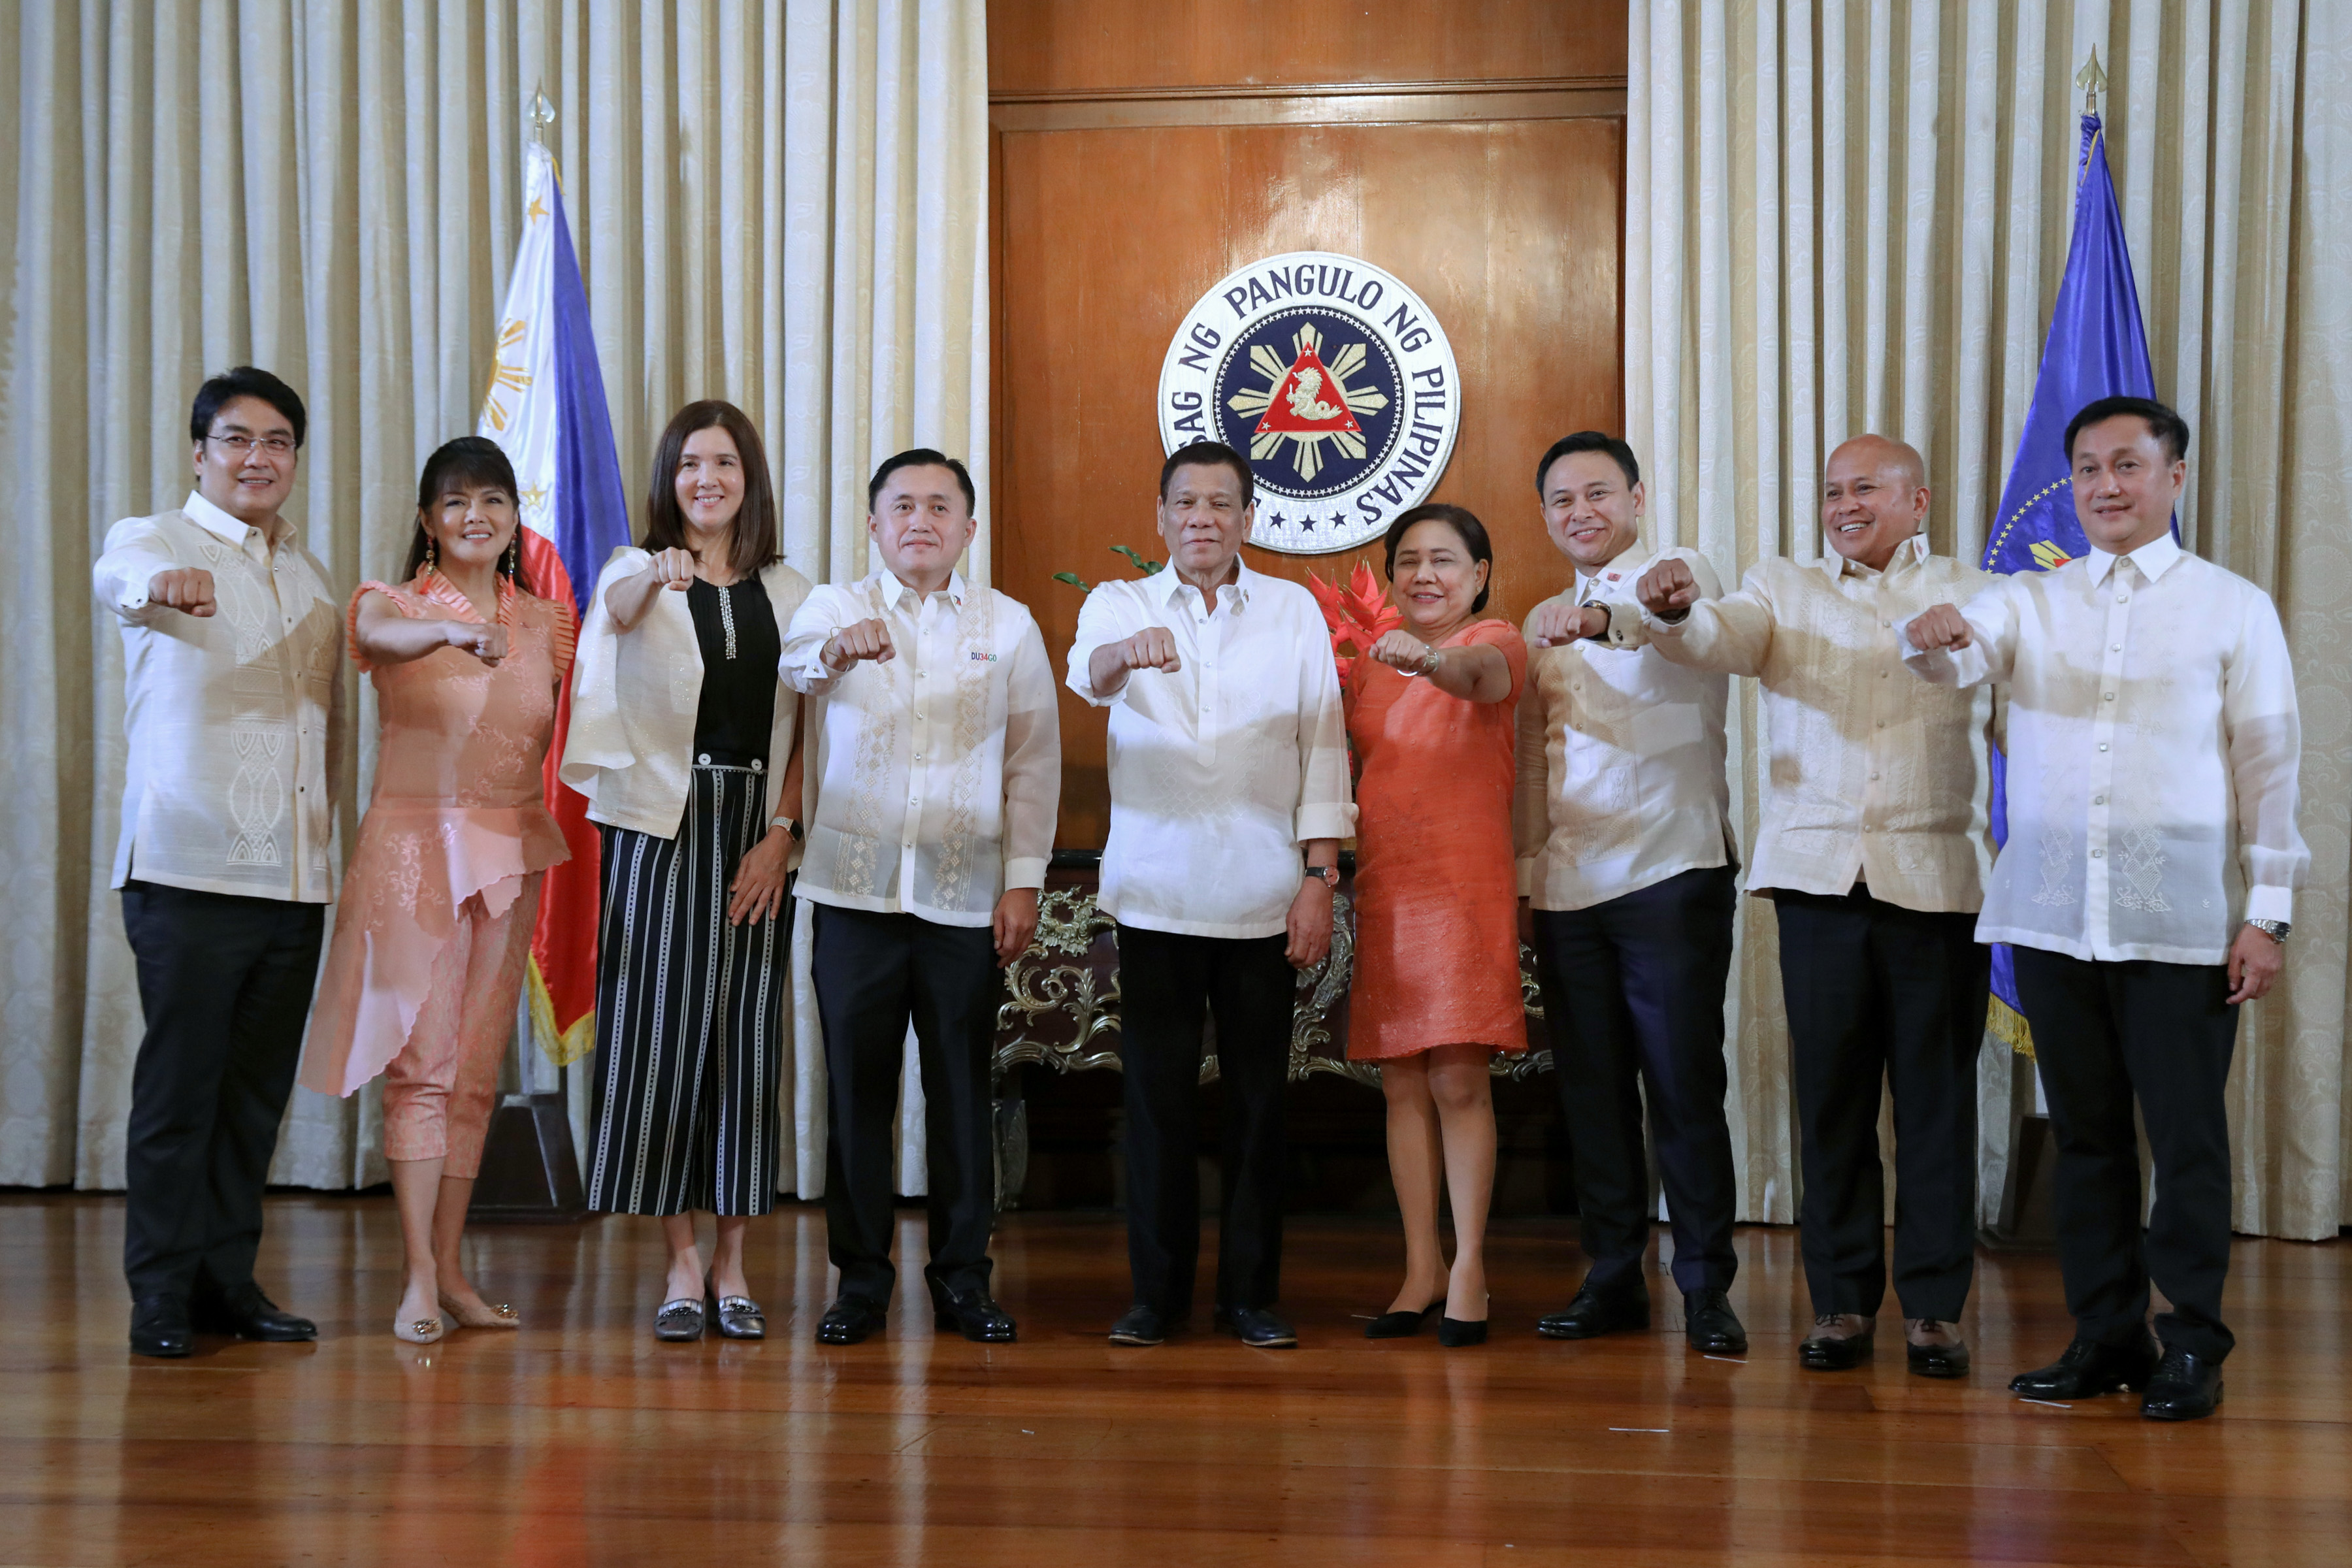 DUTERTE'S ALLIES. President Rodrigo Duterte strikes his signature pose with the newly elected senators from Hugpong ng Pagbabago following their oath-taking ceremony in Malacañang on June 25, 2019. Malacañang photo 